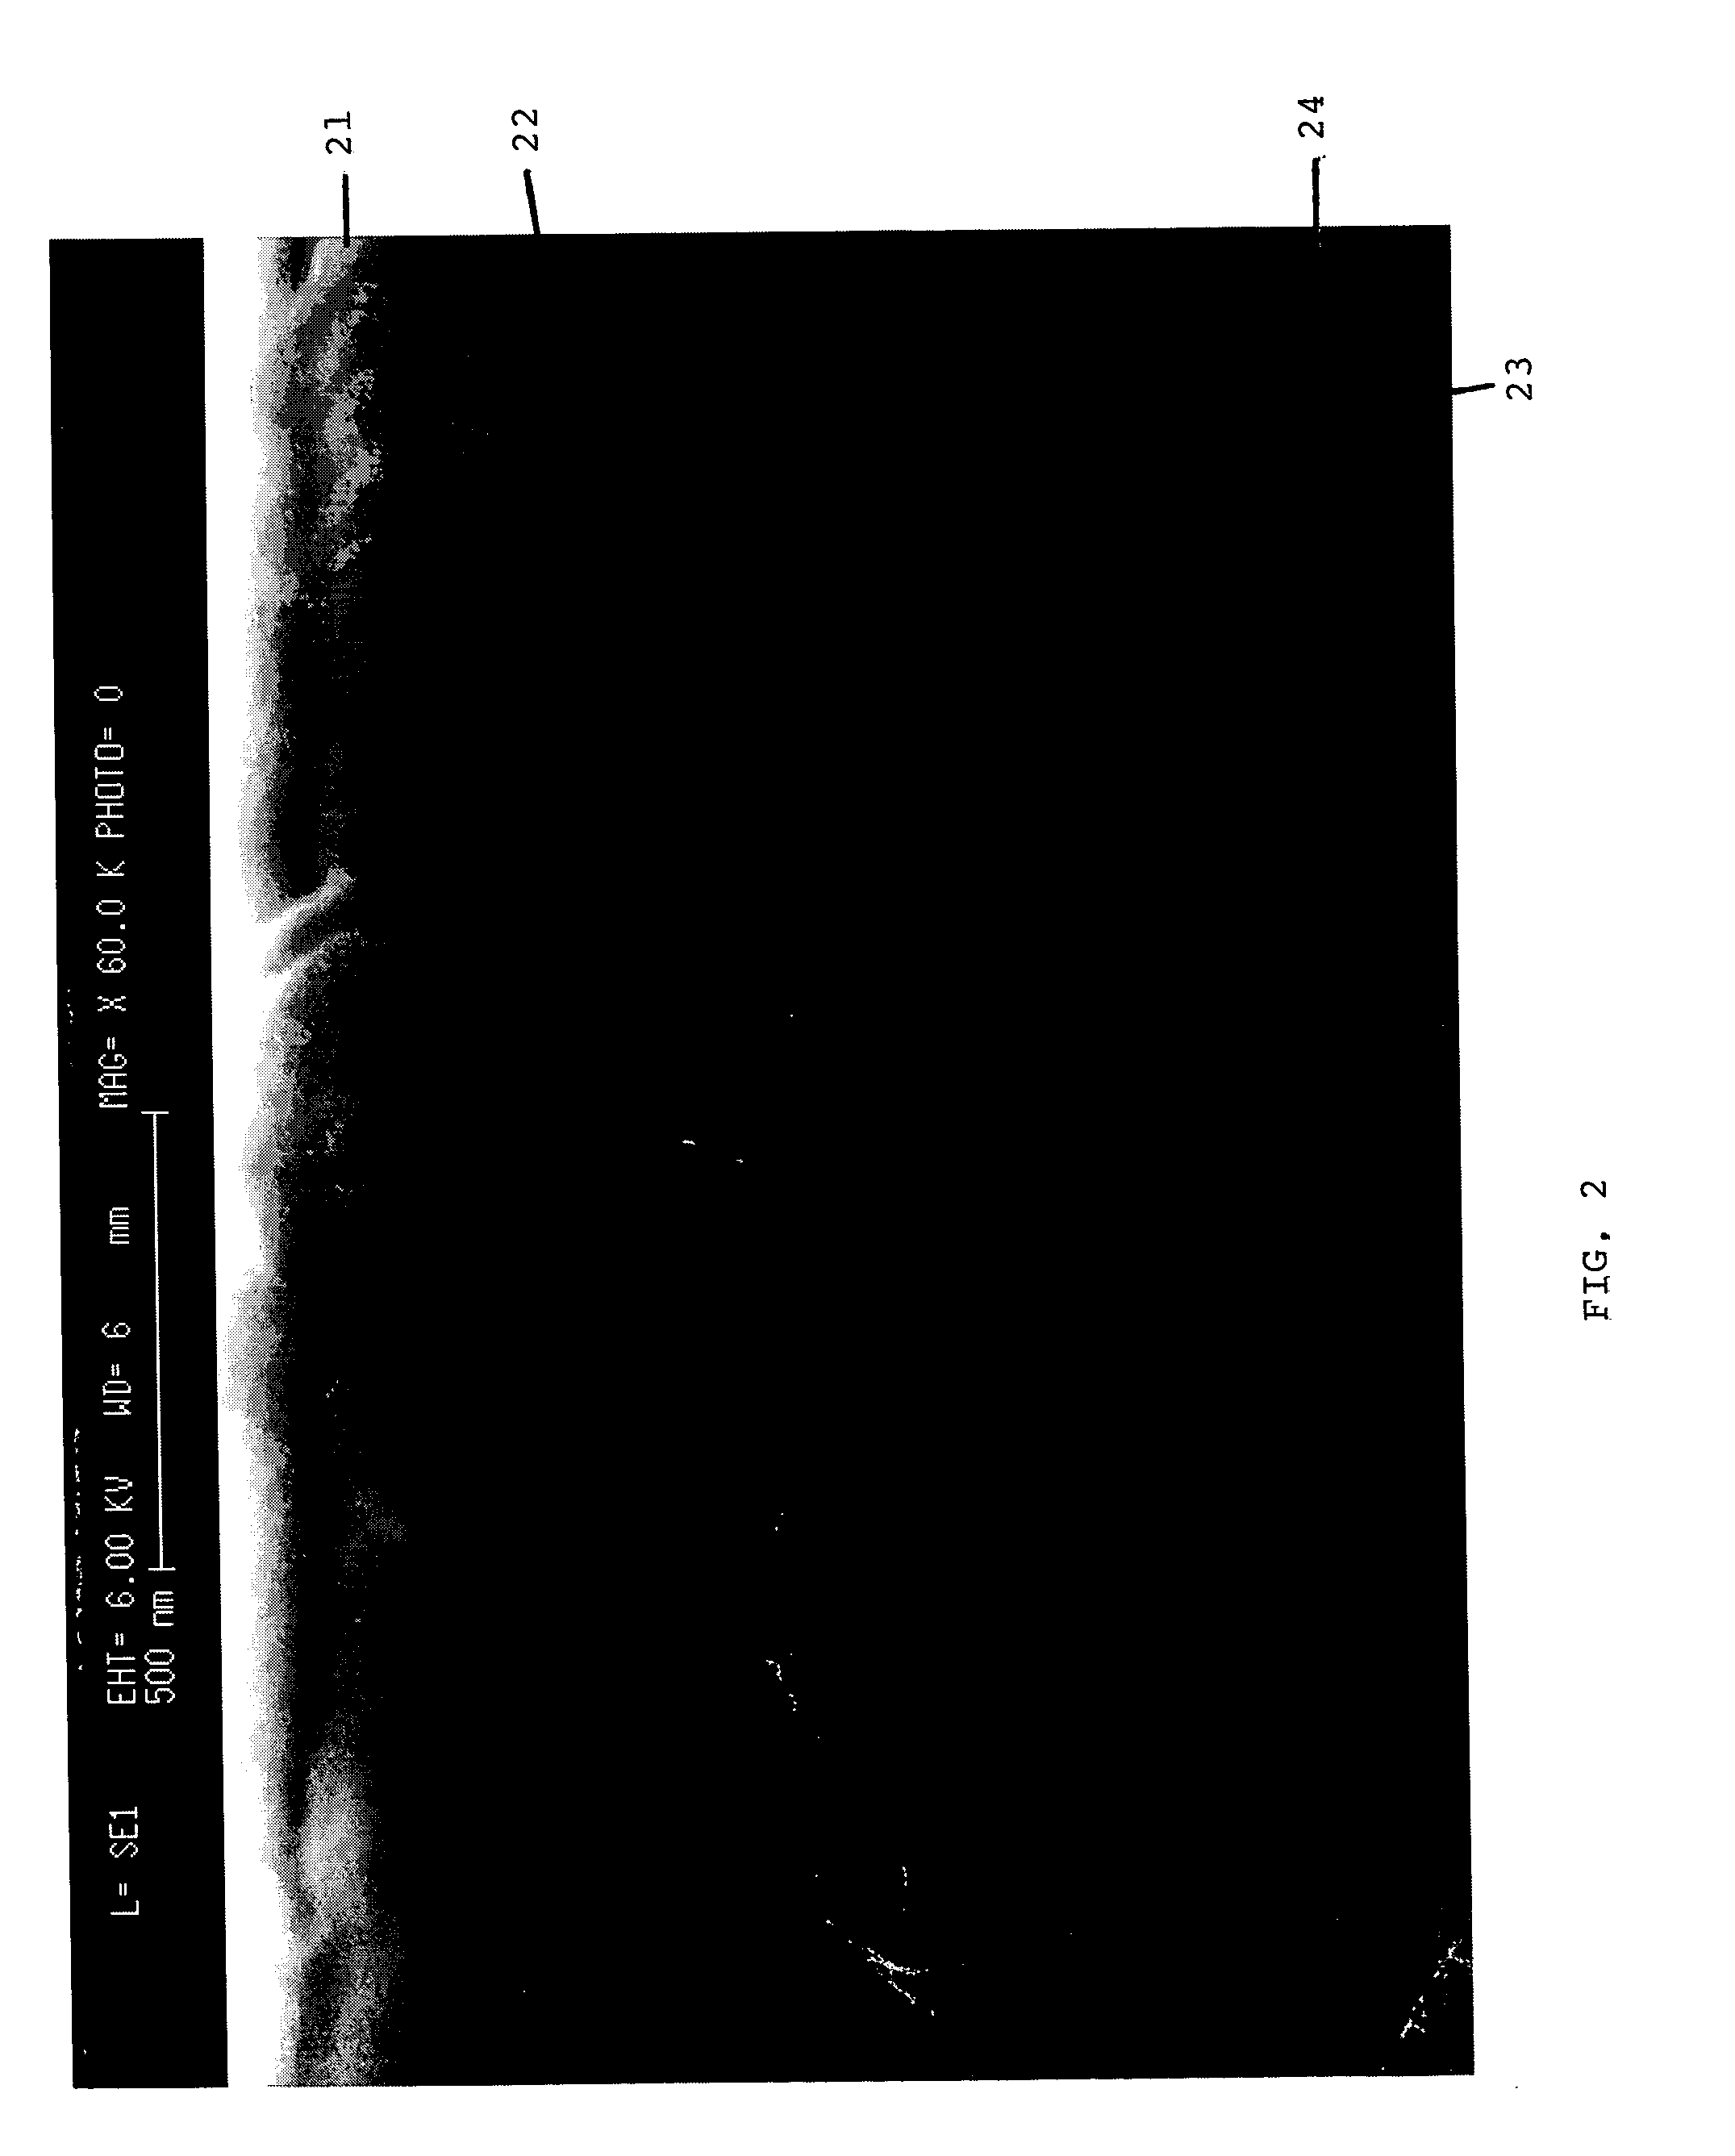 Method for making a nano-stamp and for forming, with the stamp, nano-size elements on a substrate